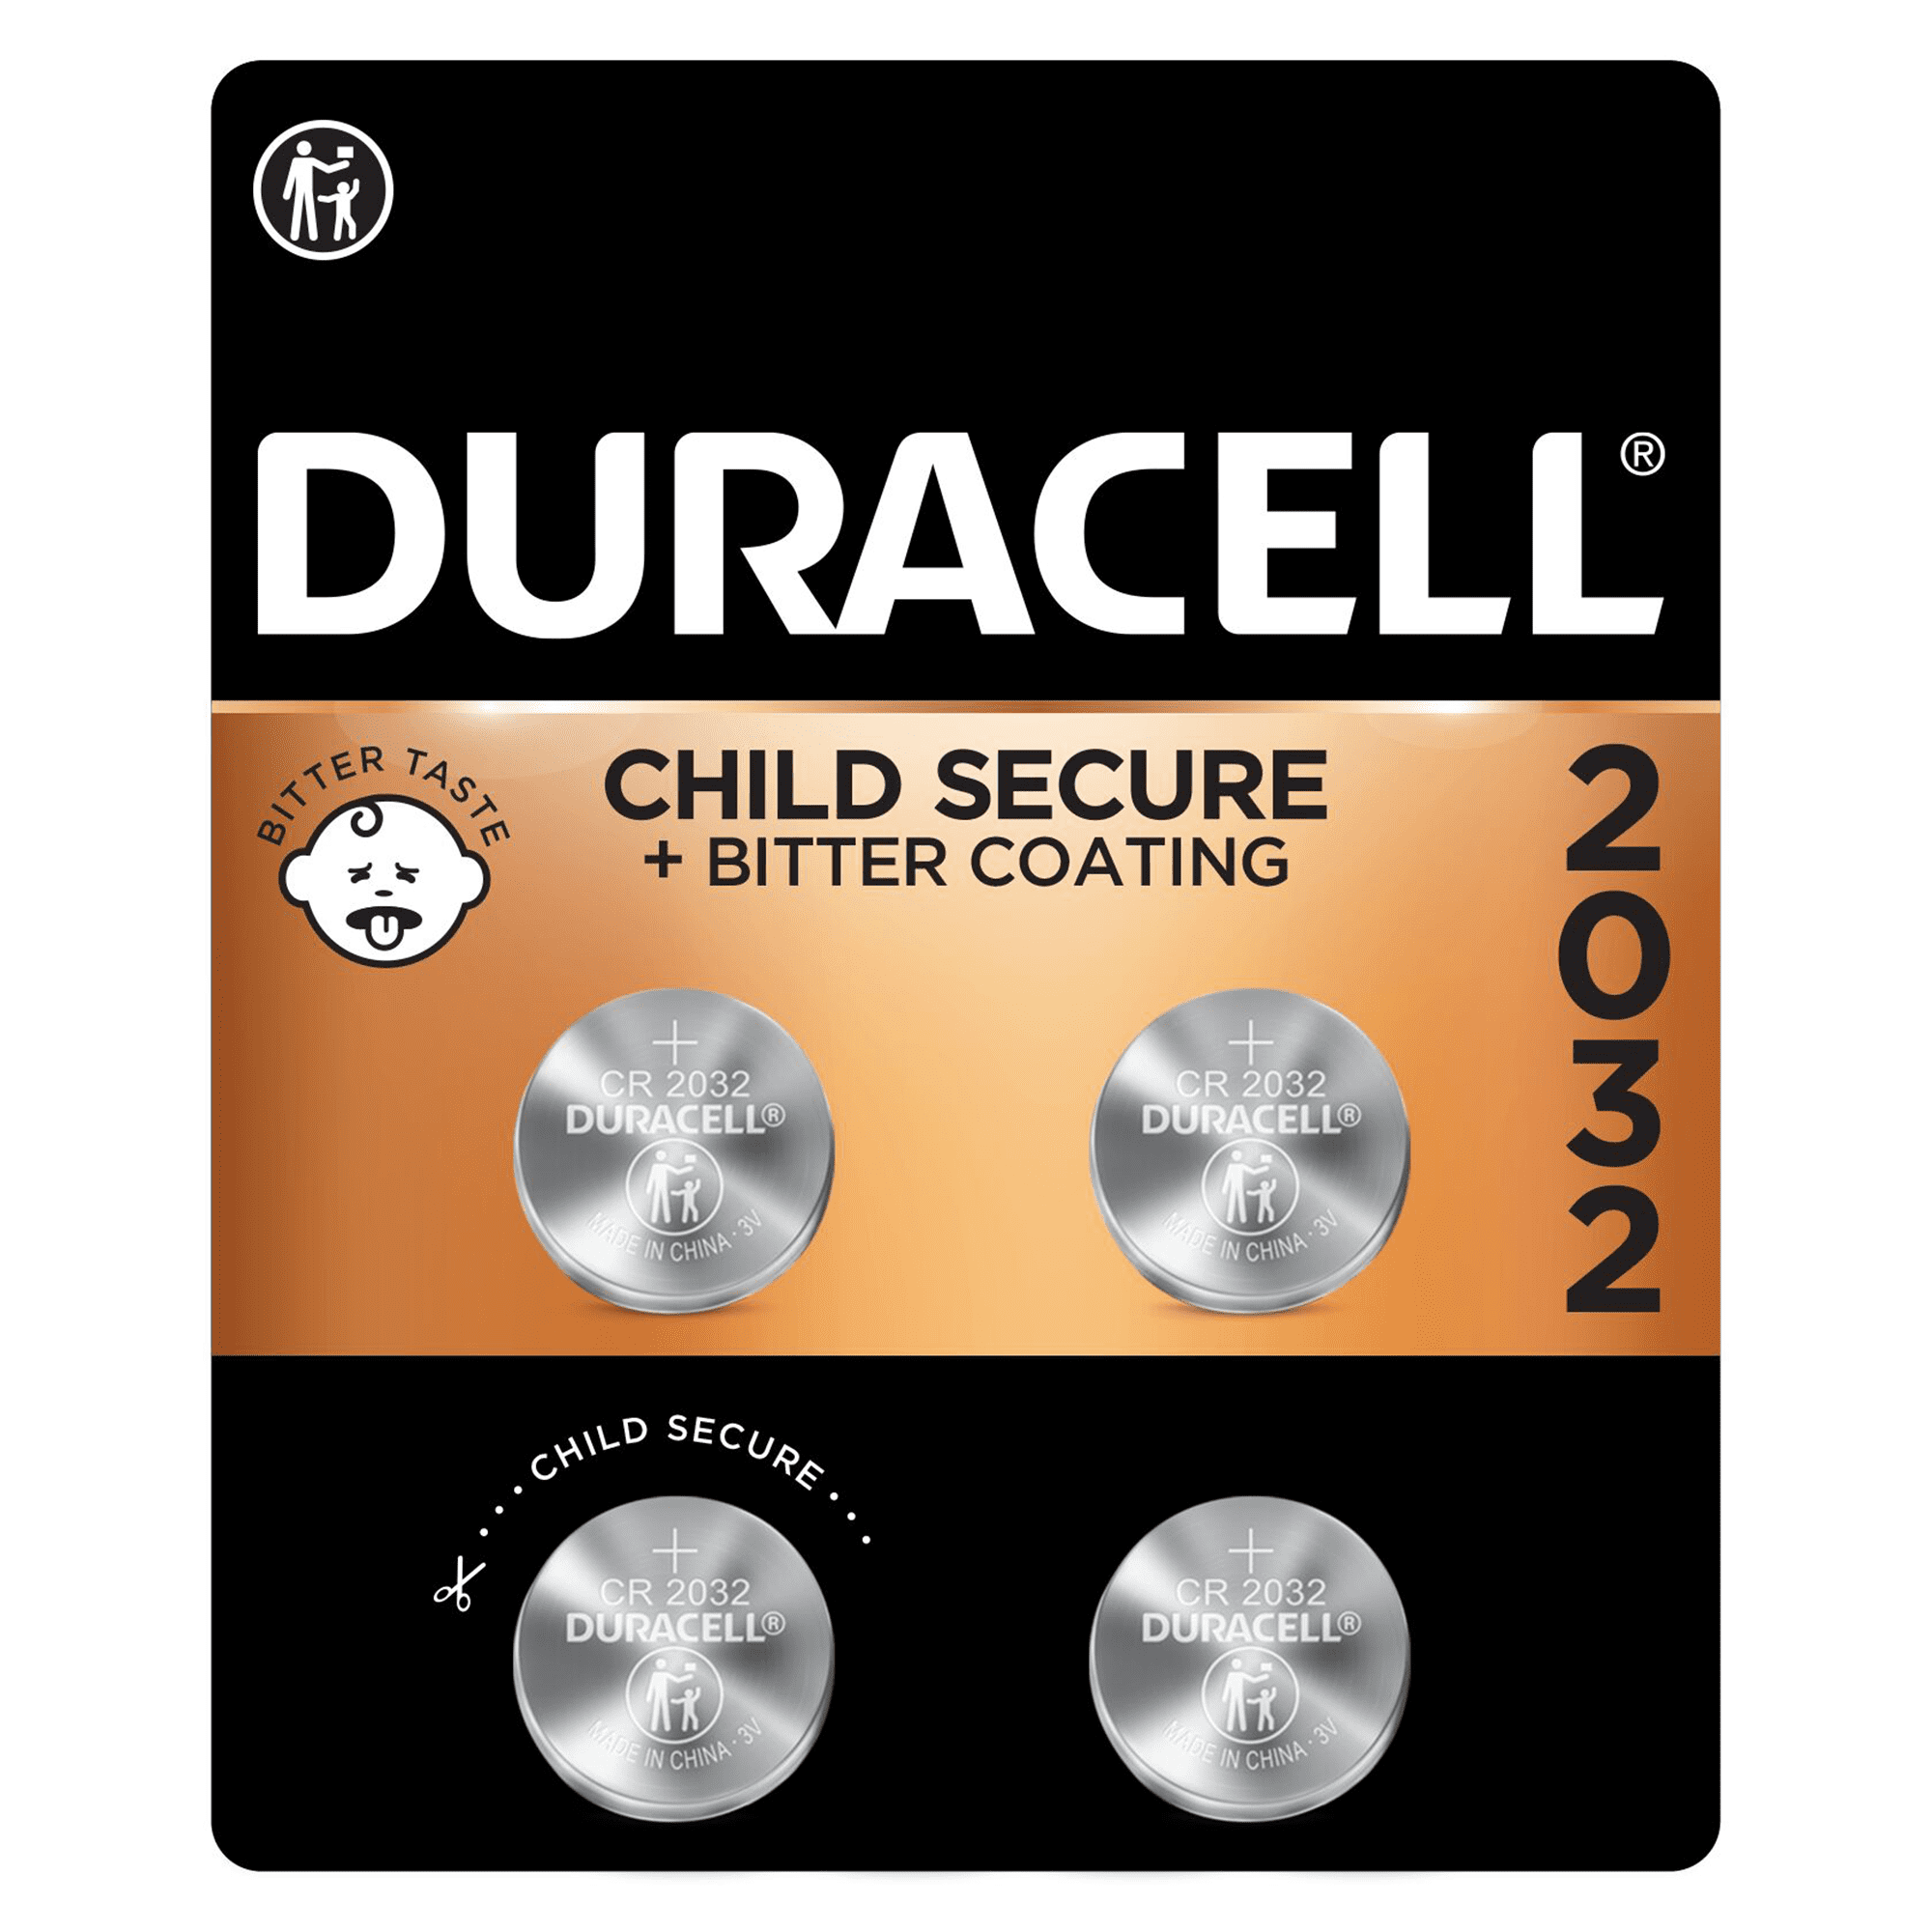 Hest slump Terapi Duracell 2032 Lithium Coin Battery 3V, CR2032 Battery, Bitter Coating  Discourages Swallowing, 4 Pack - Walmart.com